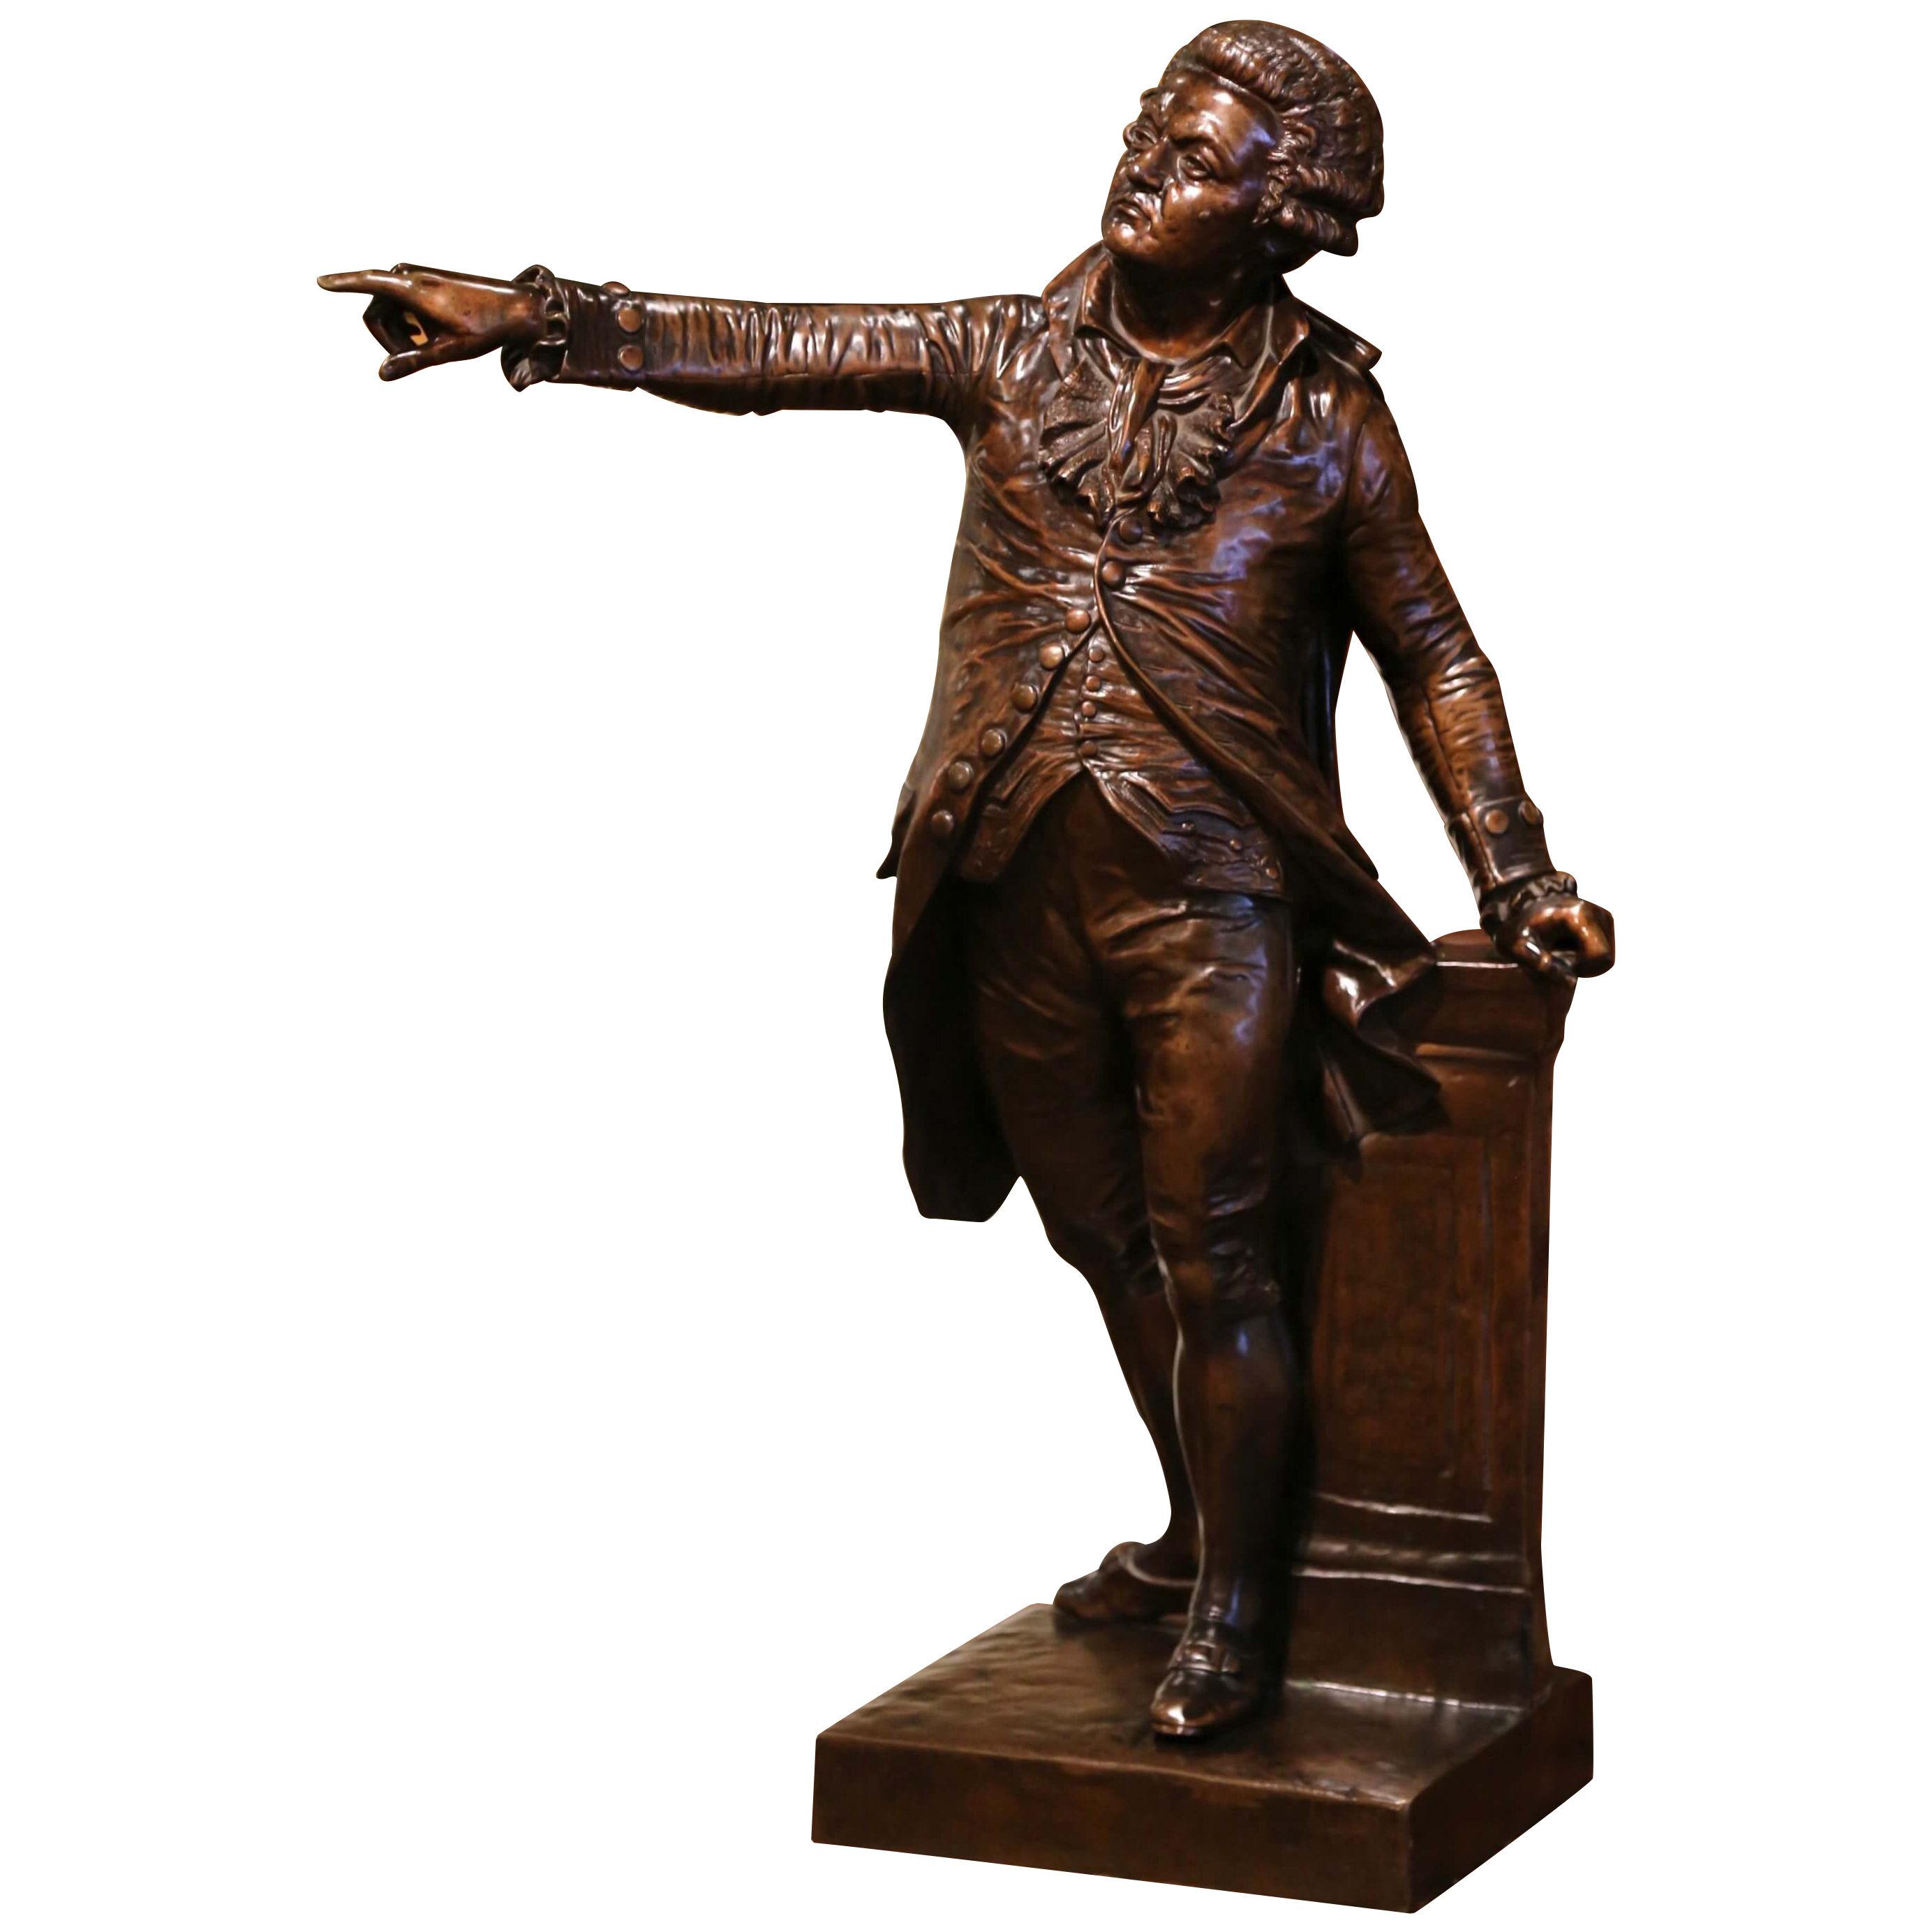 19th Century French Patinated Bronze Sculpture of Mirabeau by F. Truphene, 1857